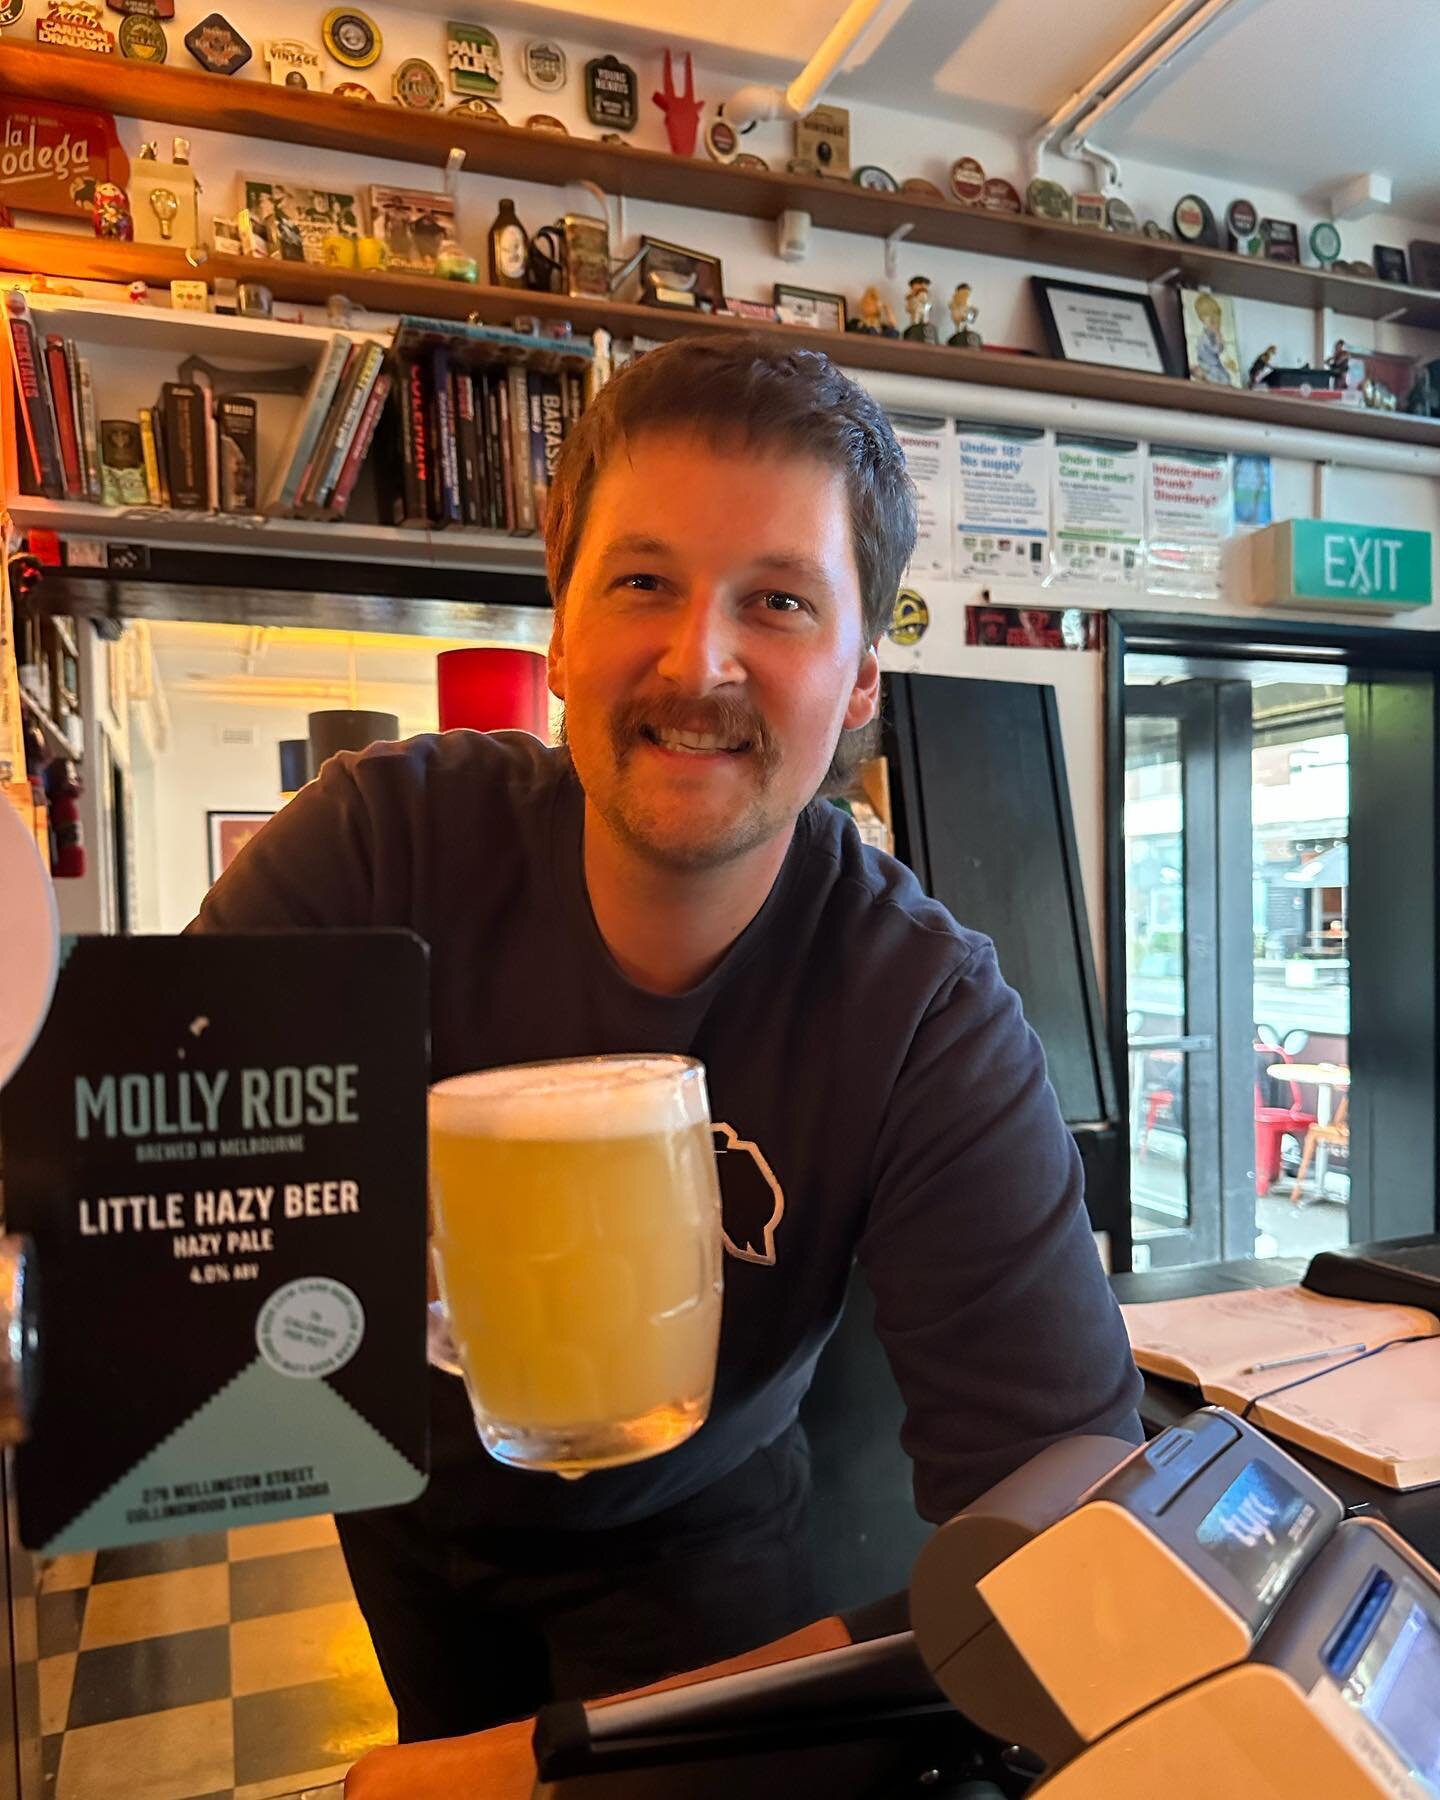 Devon from @mollyrosebrewing is here right now giving out free pots of their delicious Little Hazy Beer! So we would head to the Vic right now were we you!!